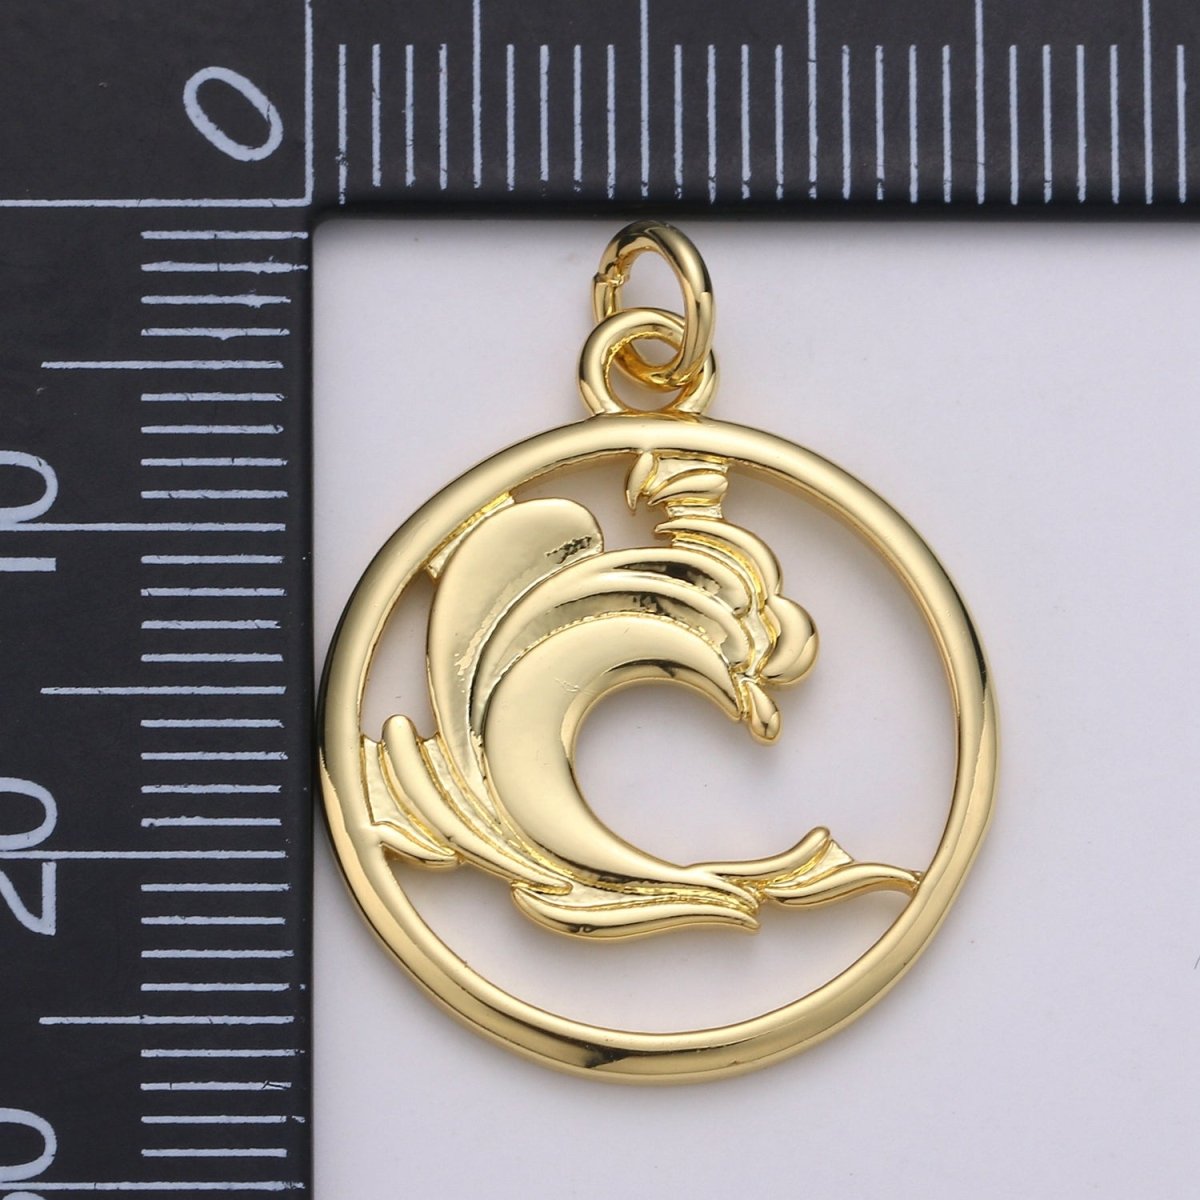 Dainty Gold Element Charm Fire Wind Earth Ocean Wave Charm. 24K Gold Filled Charm for Bracelet Necklace Earring Supply D-915 D-923 - D-925 - DLUXCA